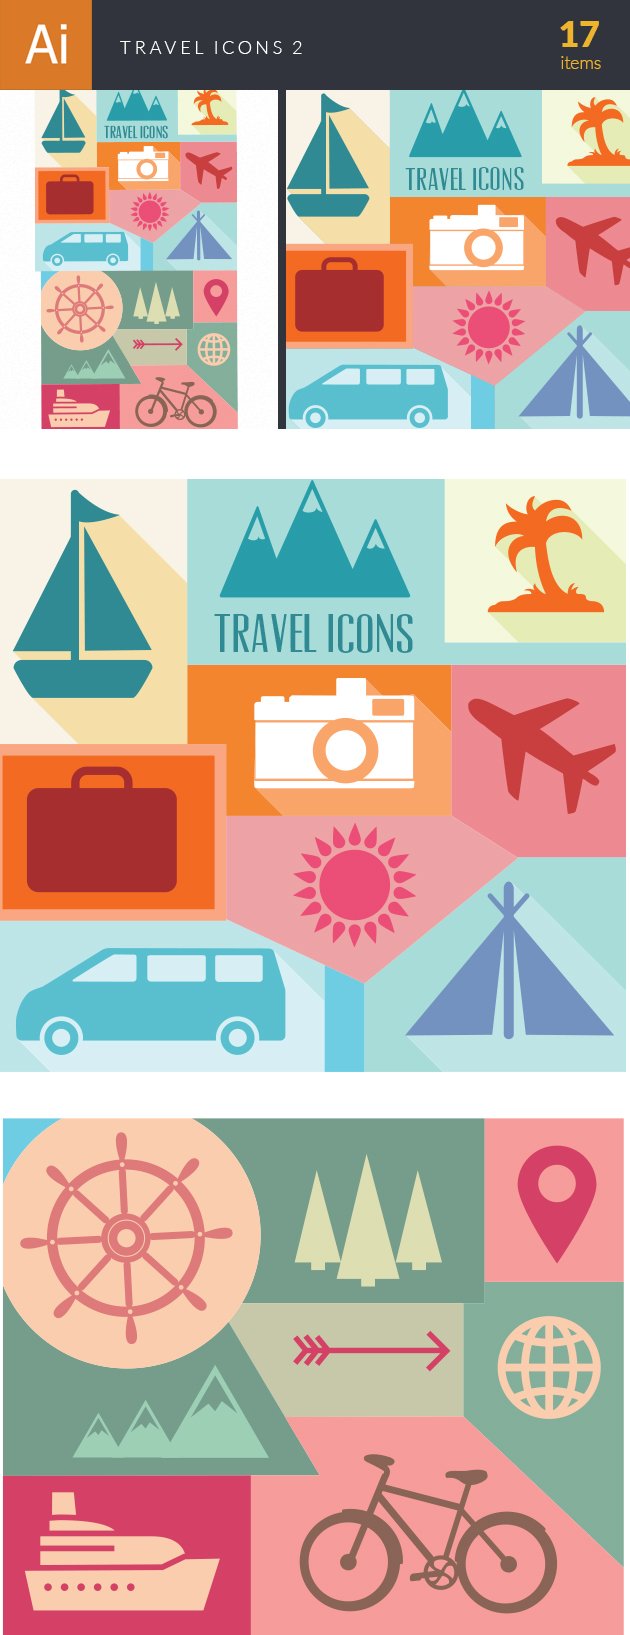 Travel Icons Vector Set 2 2